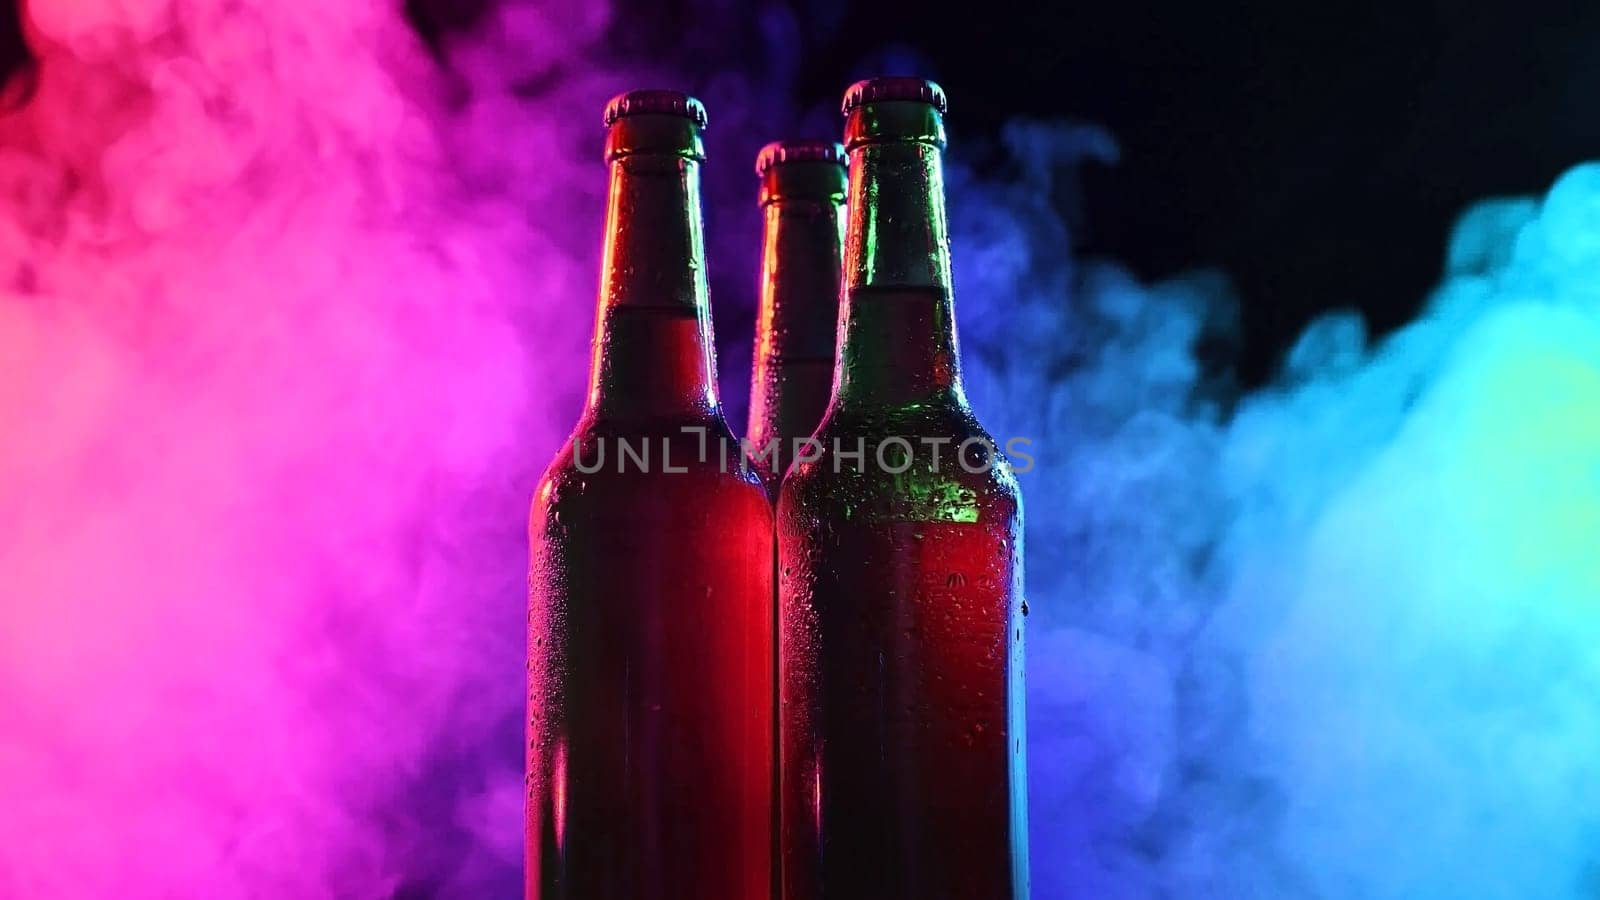 Three bottles of beer spinning in blue pink fog. by mrwed54